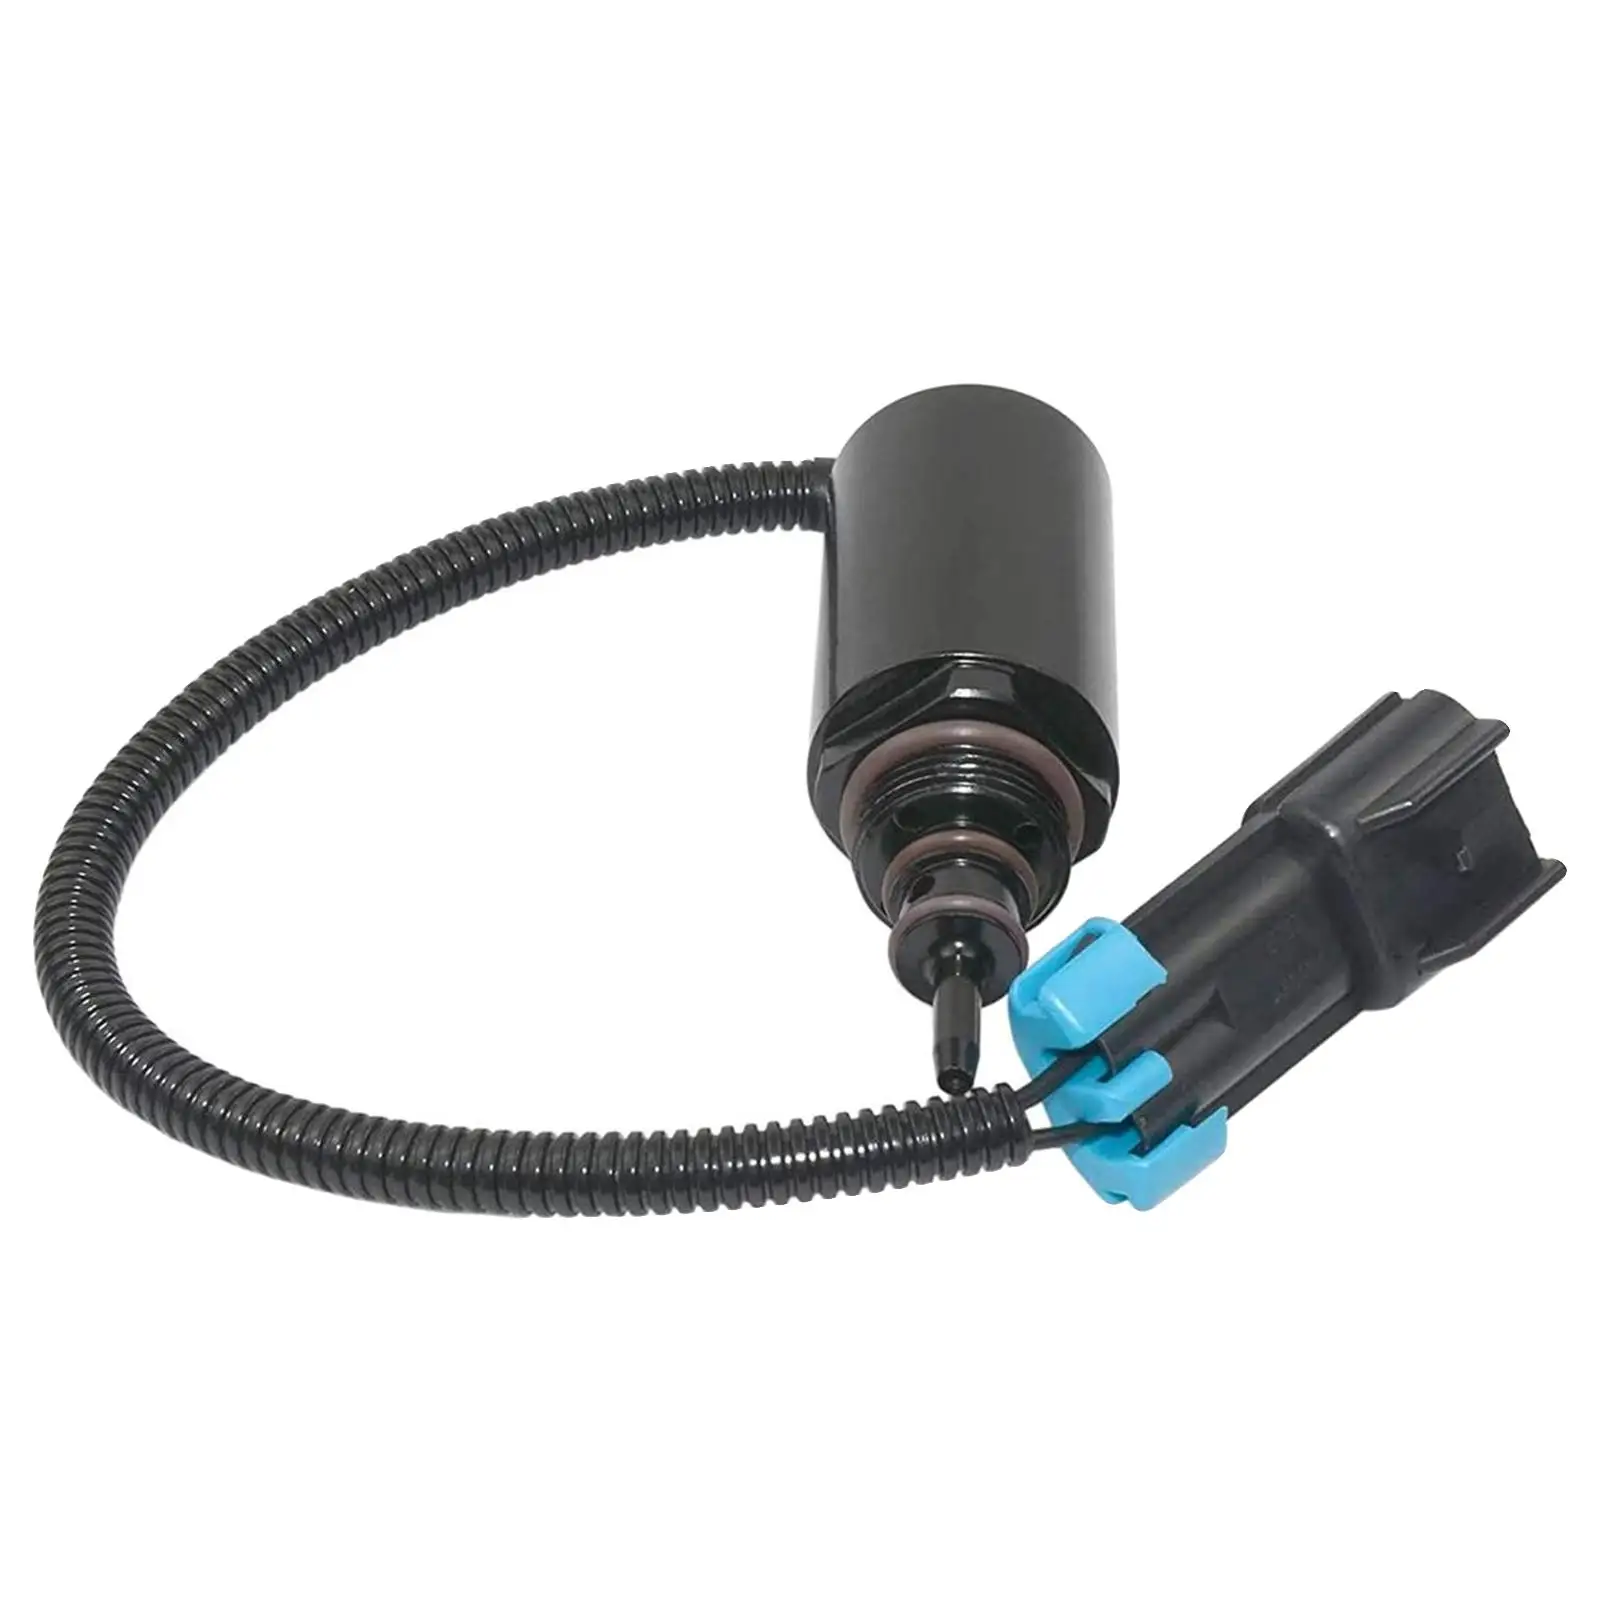  Wastegate Control Solenoid Accessories Easy Installation,   5.9L Diesels 04-2007 ,5140305AA ,4036054, He351CW